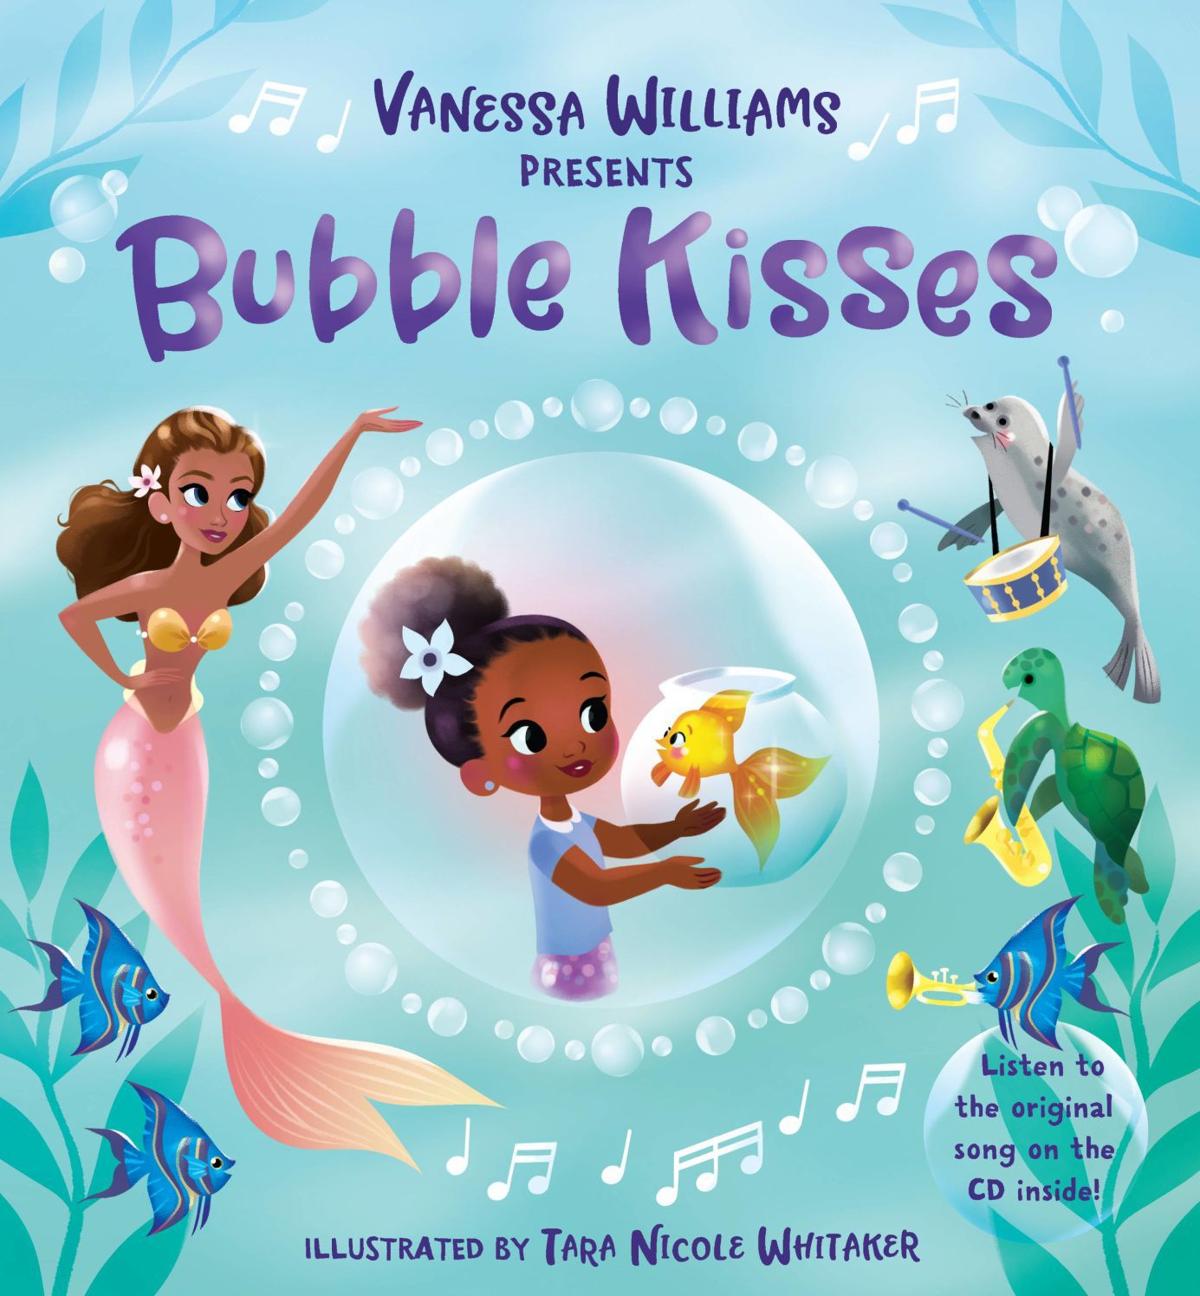 Expect Vanessa Williams Bubble Kisses To Go More Than One Round With Kids Lifestyle Phillytrib Com - bubble guppies roblox id code